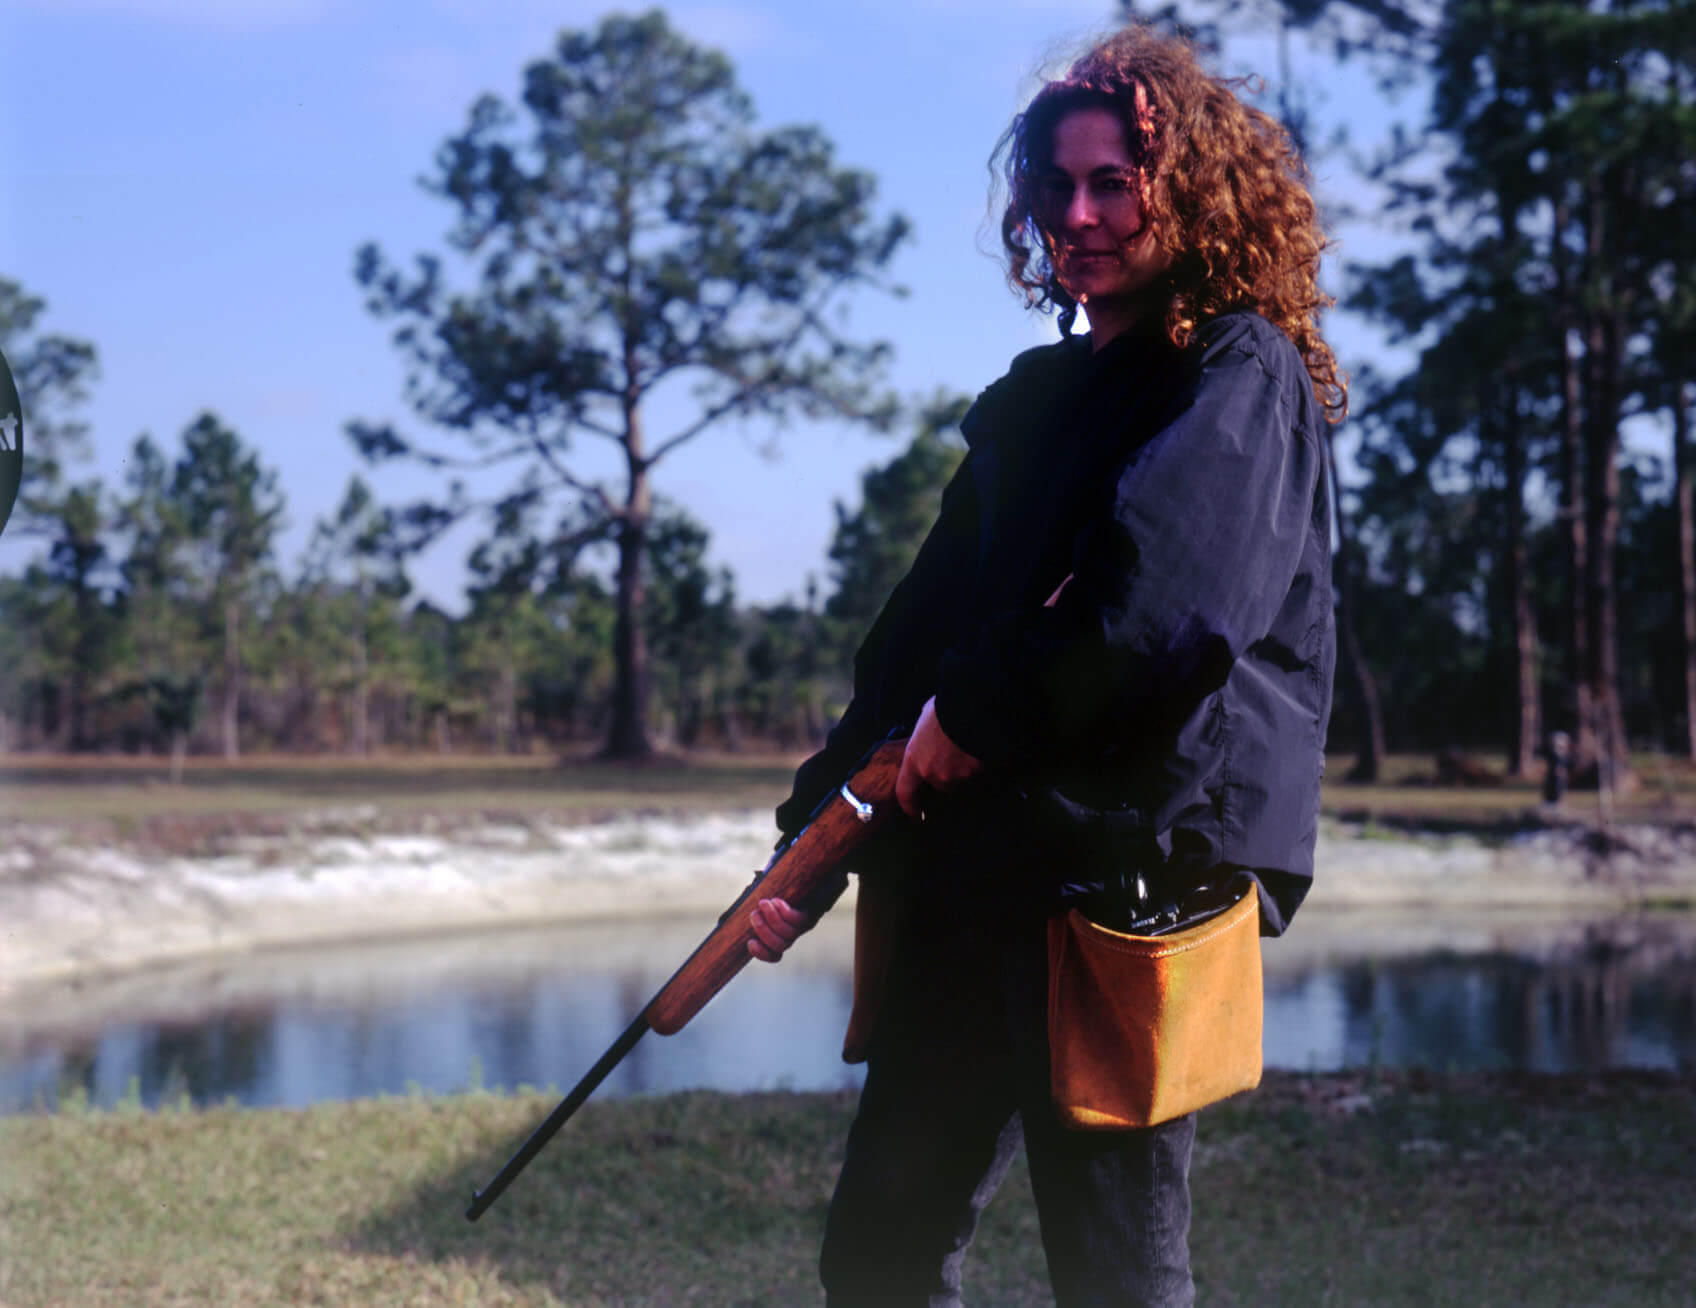 Julie Kahn stands slighty far away from the camera, she is standing on a patch of grass in front of a pond. She is turned to the side away from the camera with her head turned to the left to face the camera. She has slightly longer than shoulder length hair that is brown and curly. She is wearing jeans and a blue jacket with a yellow bag hanging at her left hip. She is holding a shotgun pointed down towards the ground.